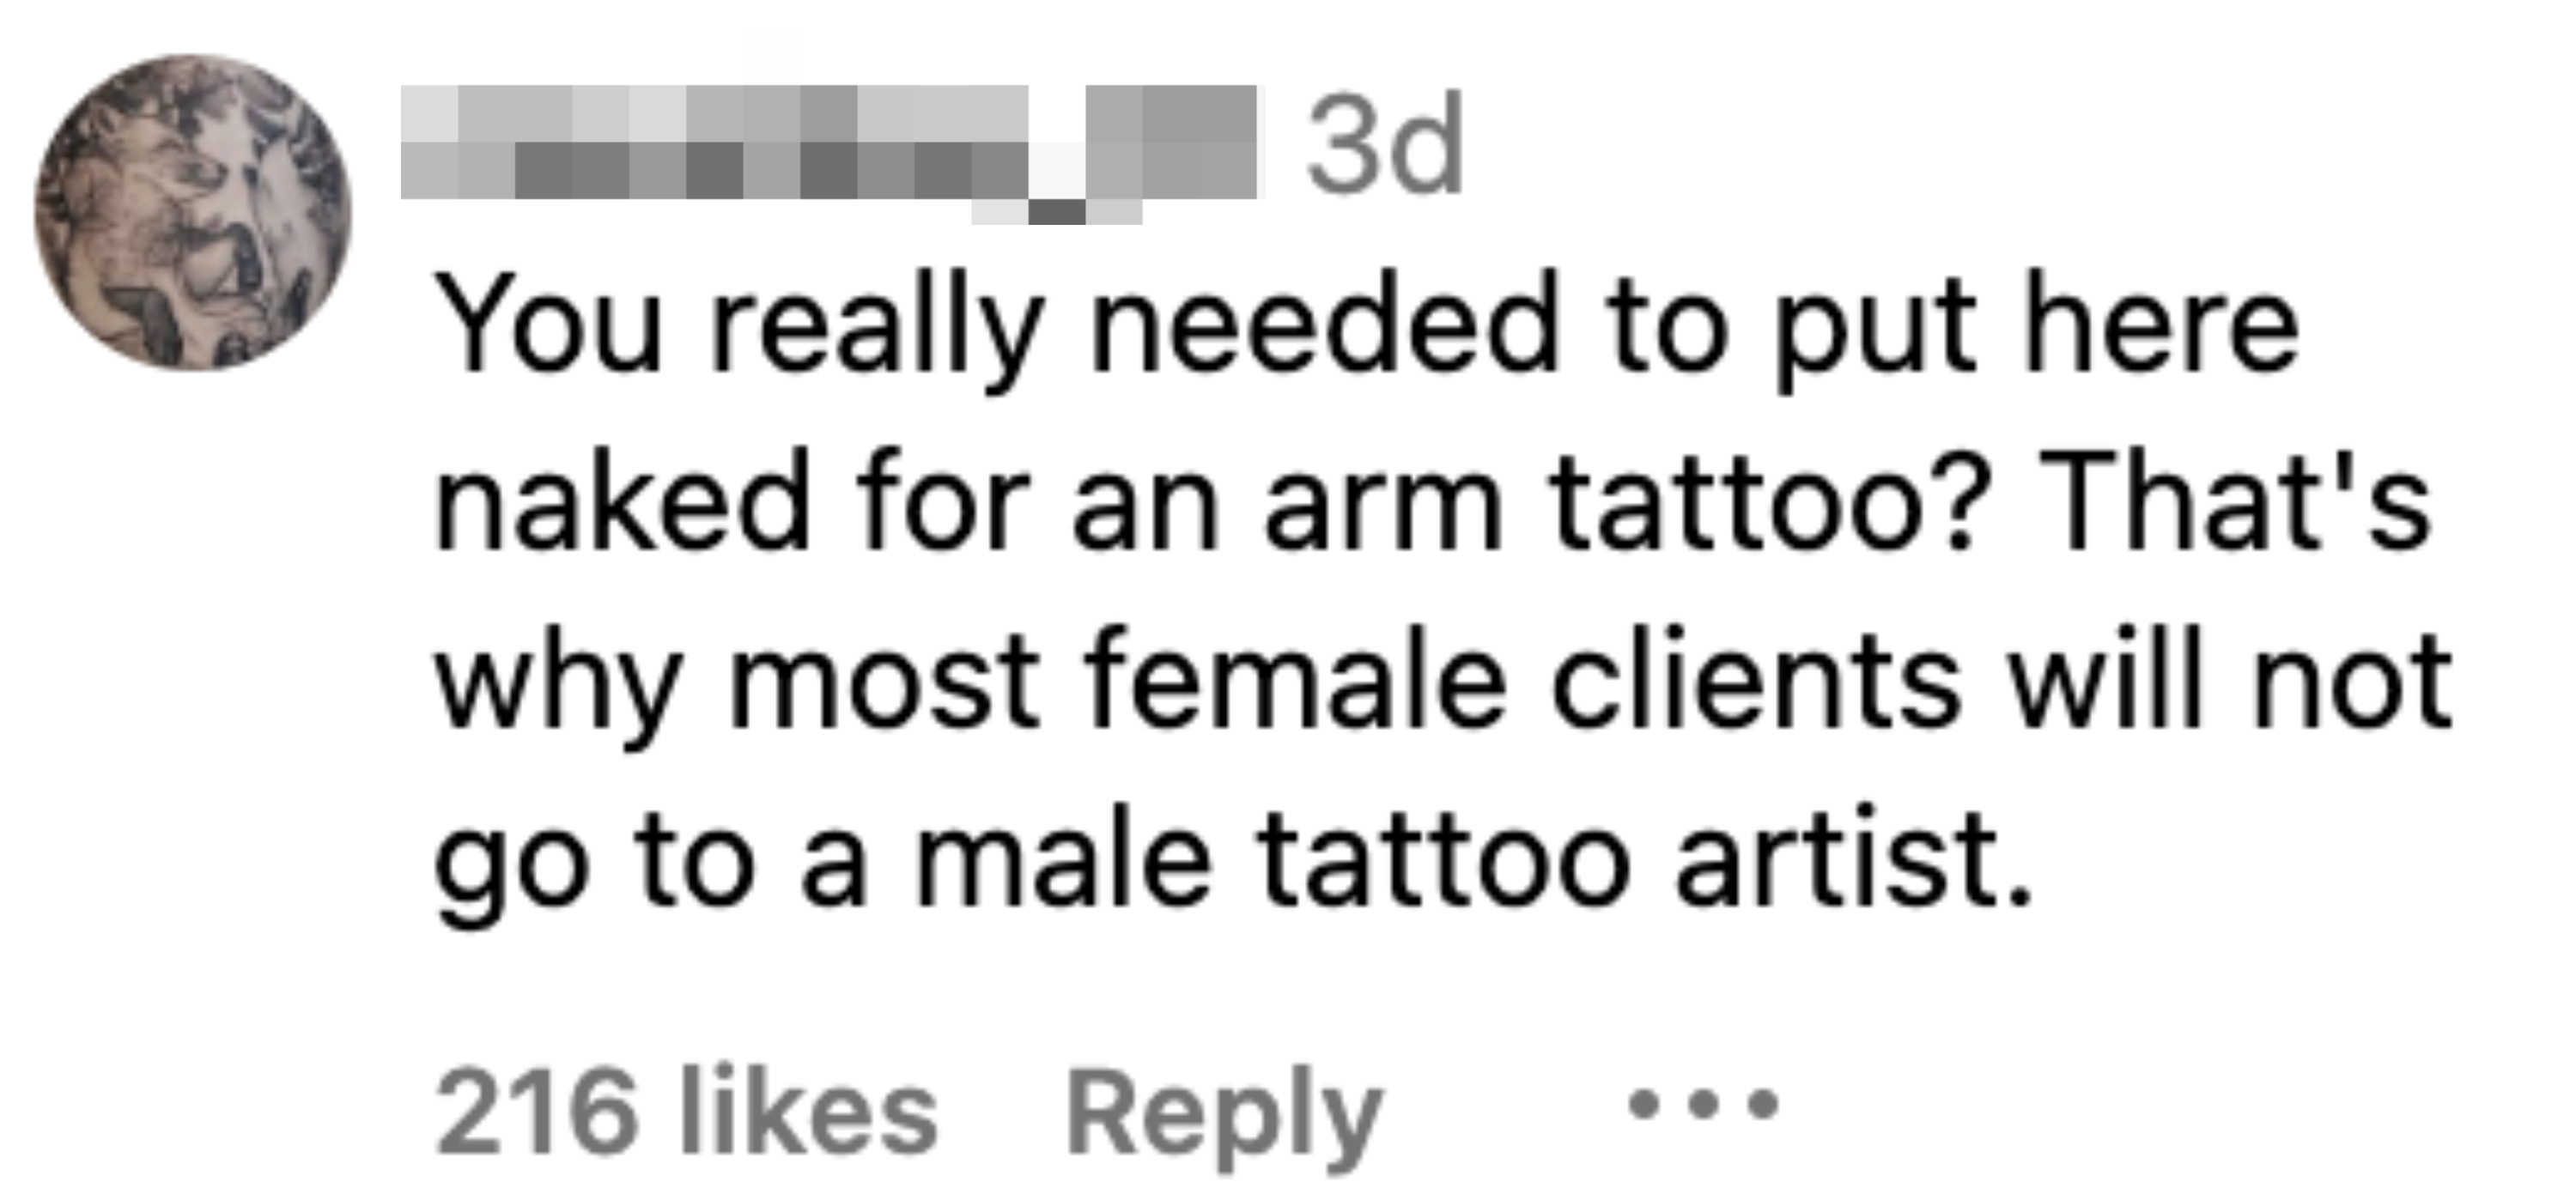 you really needed to put her naked for an arm tattoo that&#x27;s why most female clients will not go to a male tattoo artist